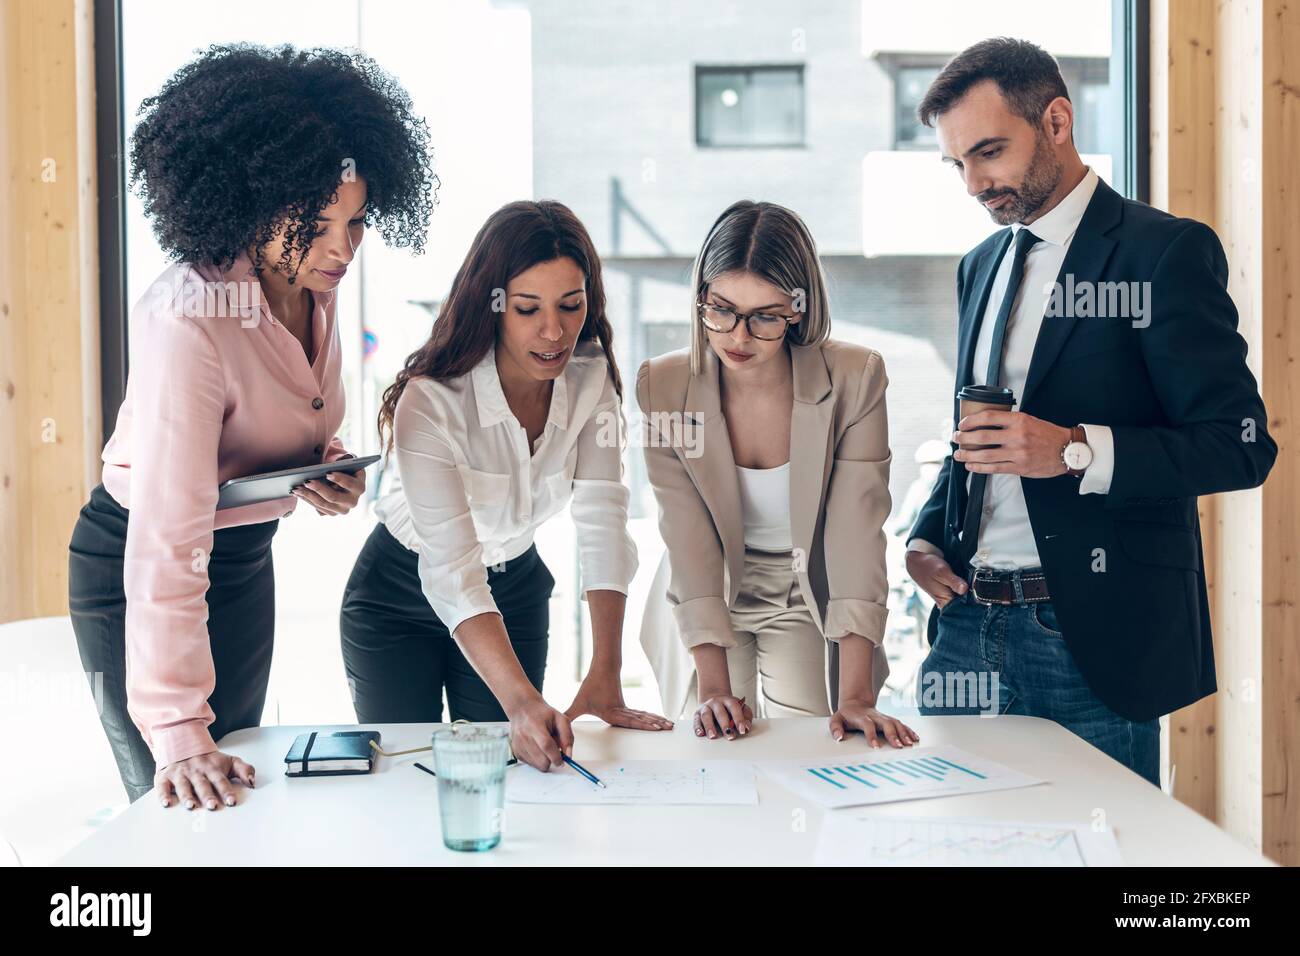 Multi-ethnic male and female business professionals planning in office Stock Photo